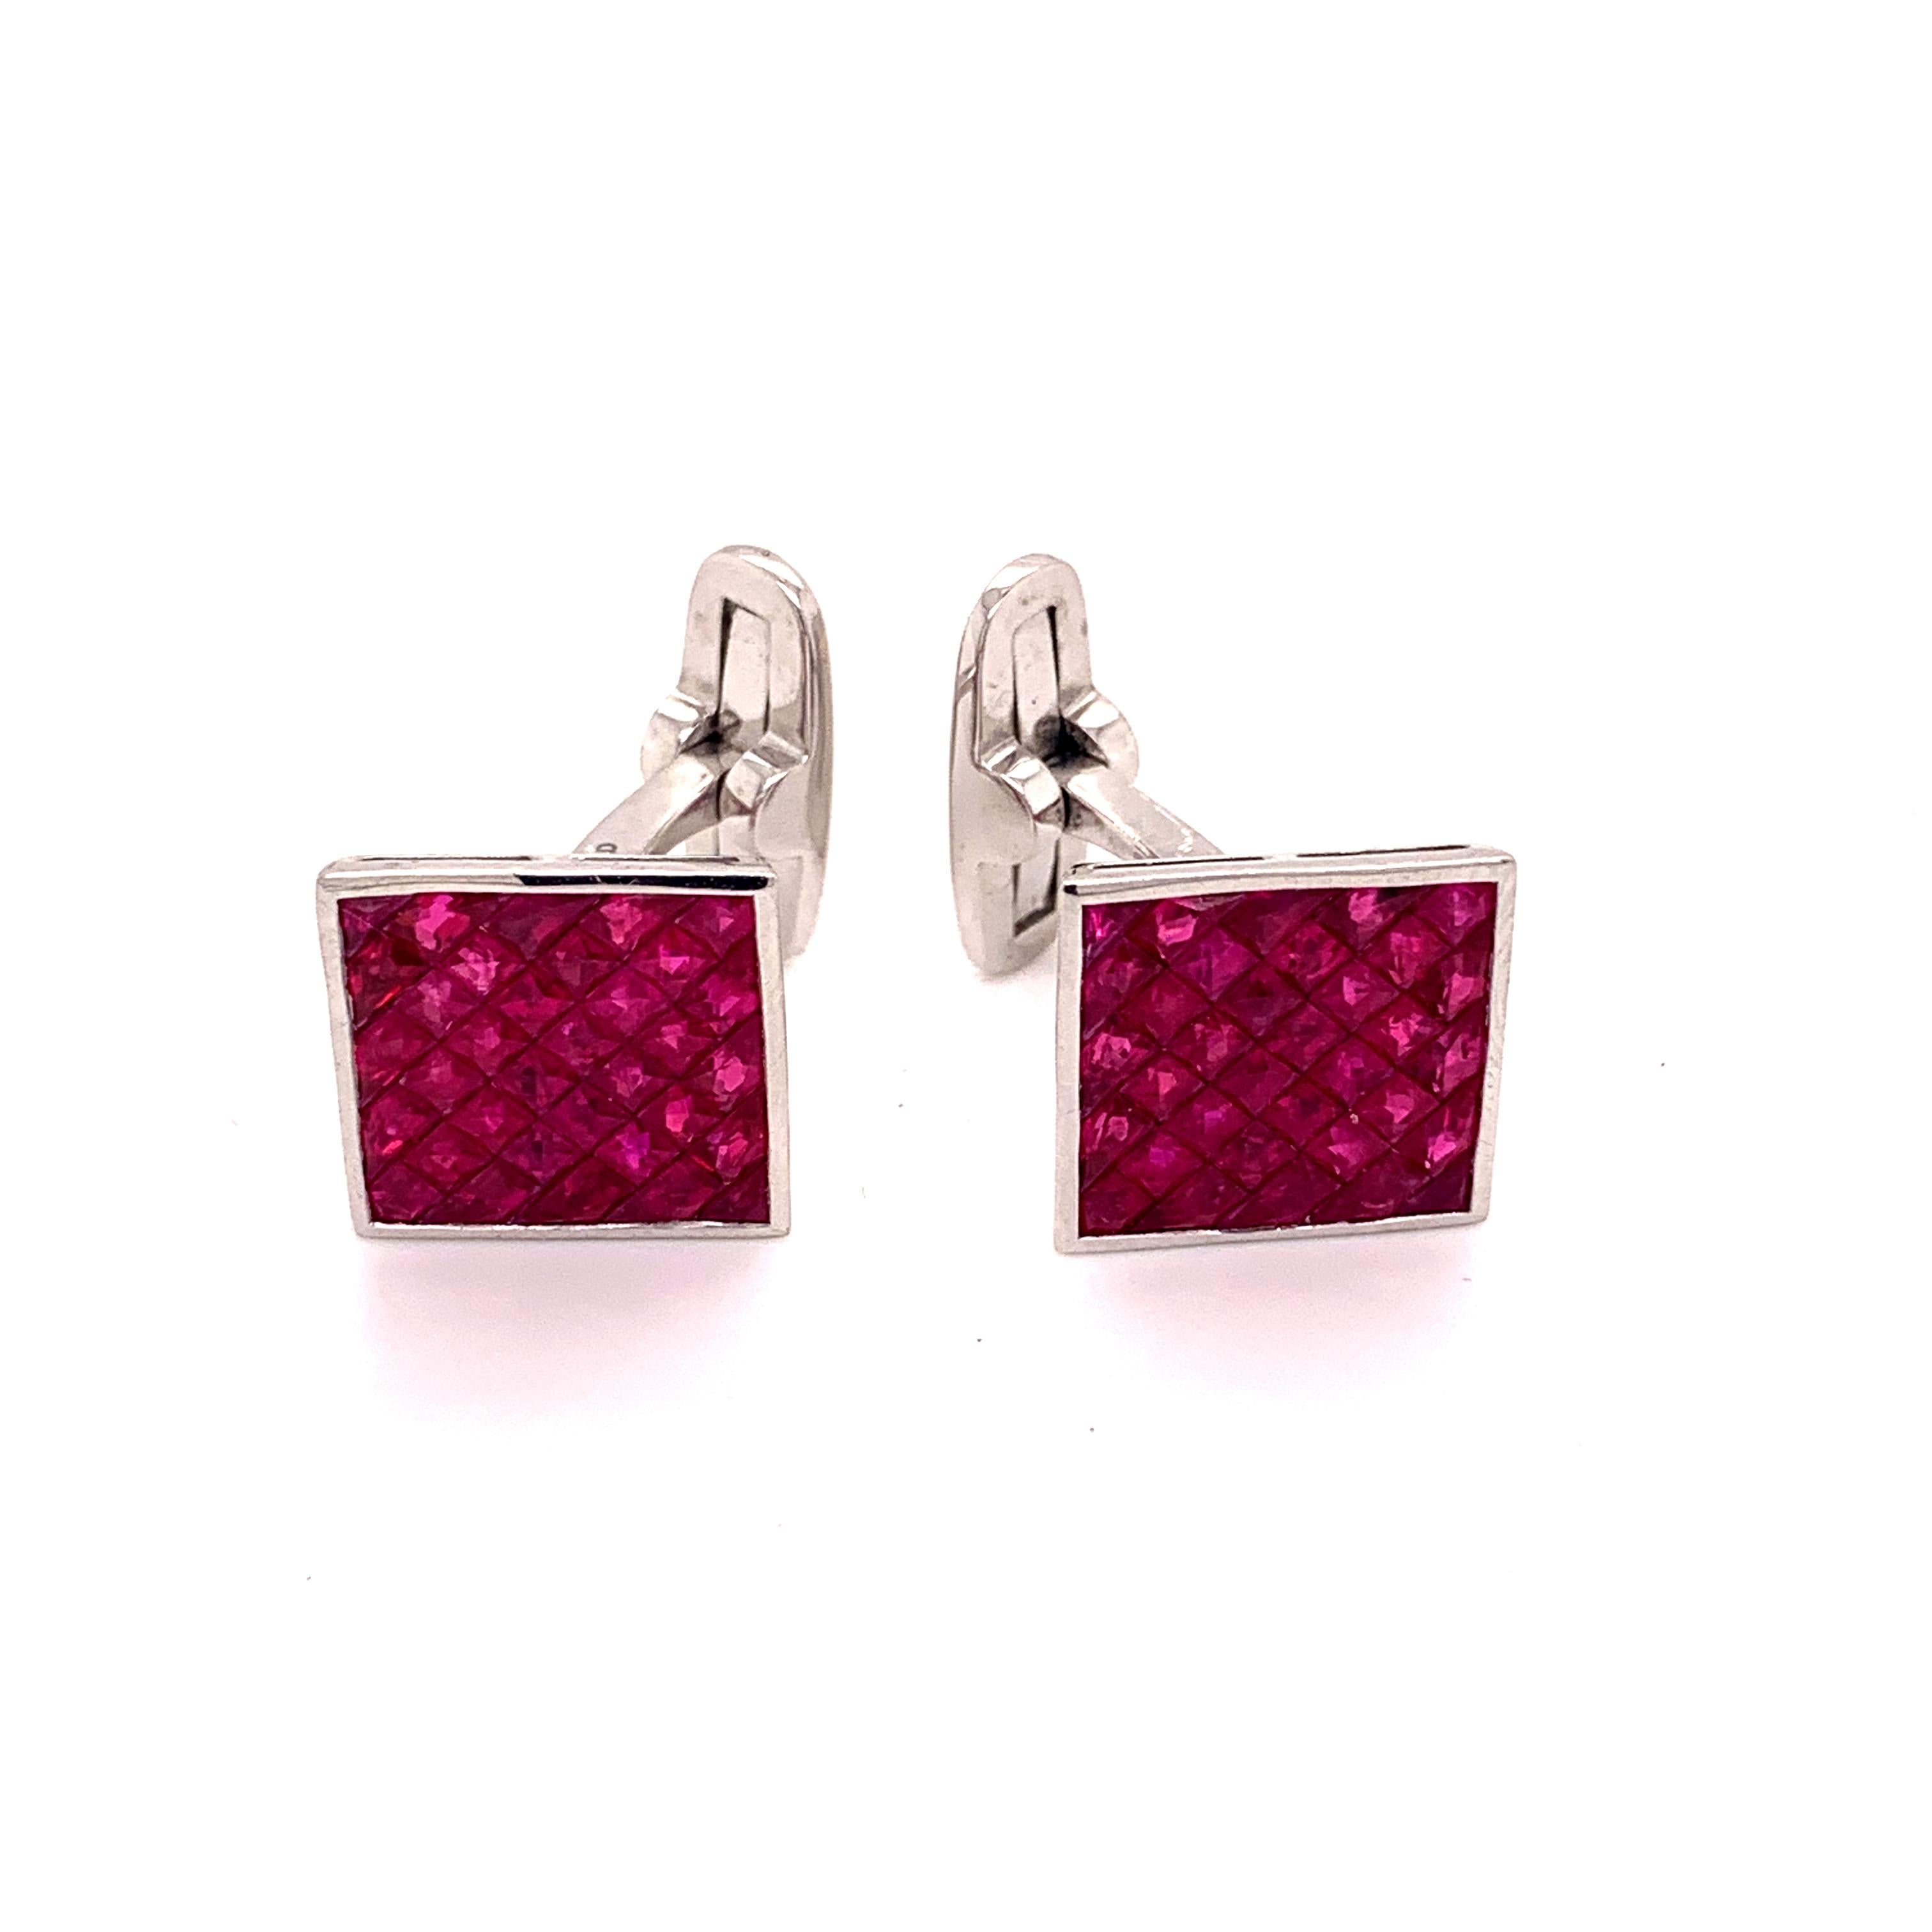 Sophia D. 4.34 Carat Ruby Cufflinks in Platinum In New Condition For Sale In New York, NY